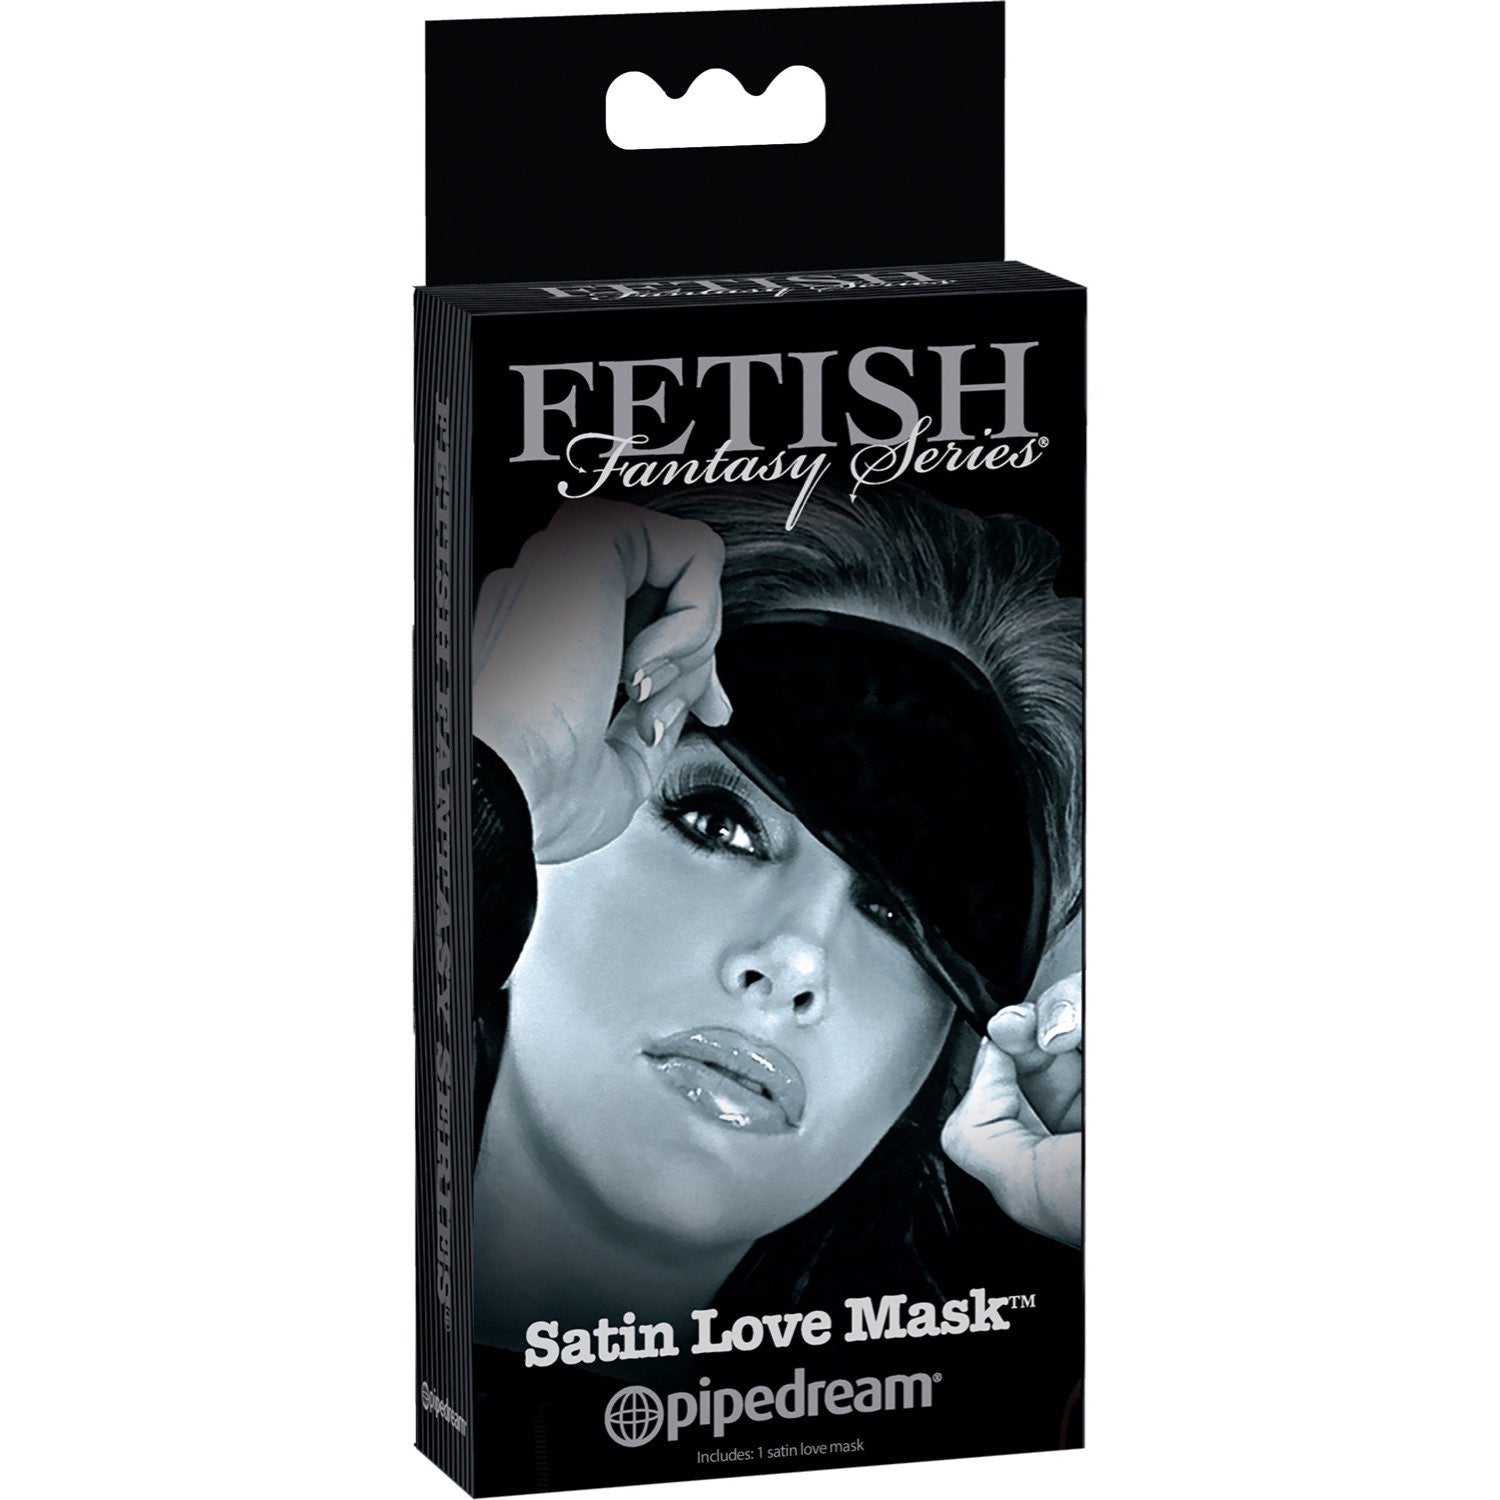 Fetish Fantasy Series Limited Edition Satin Love Mask - Black Eye Mask by Pipedream